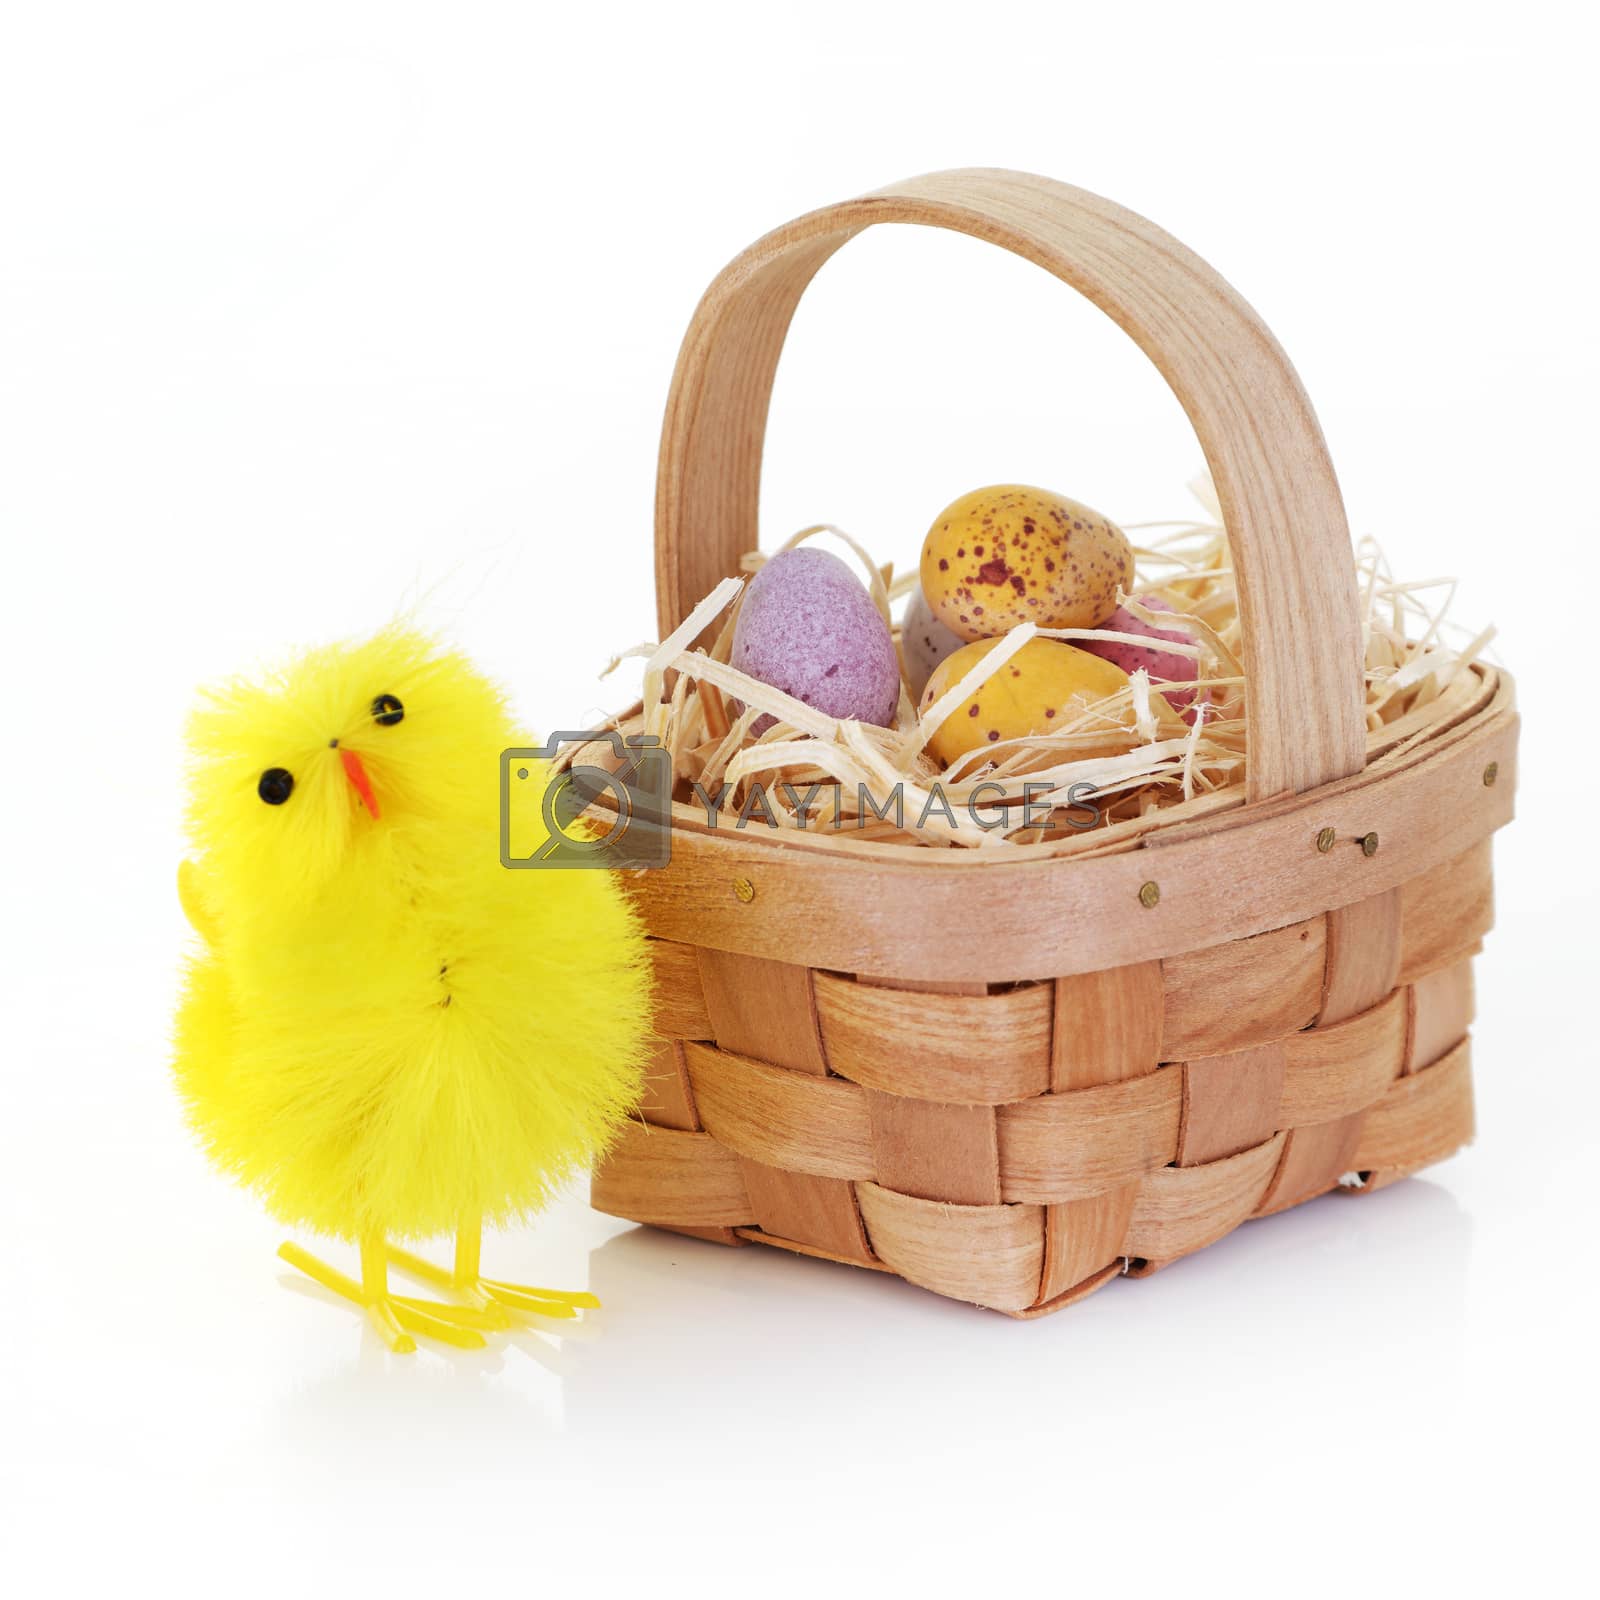 Royalty free image of Easter chick and candy eggs in a basket with straw on white by VivacityImages